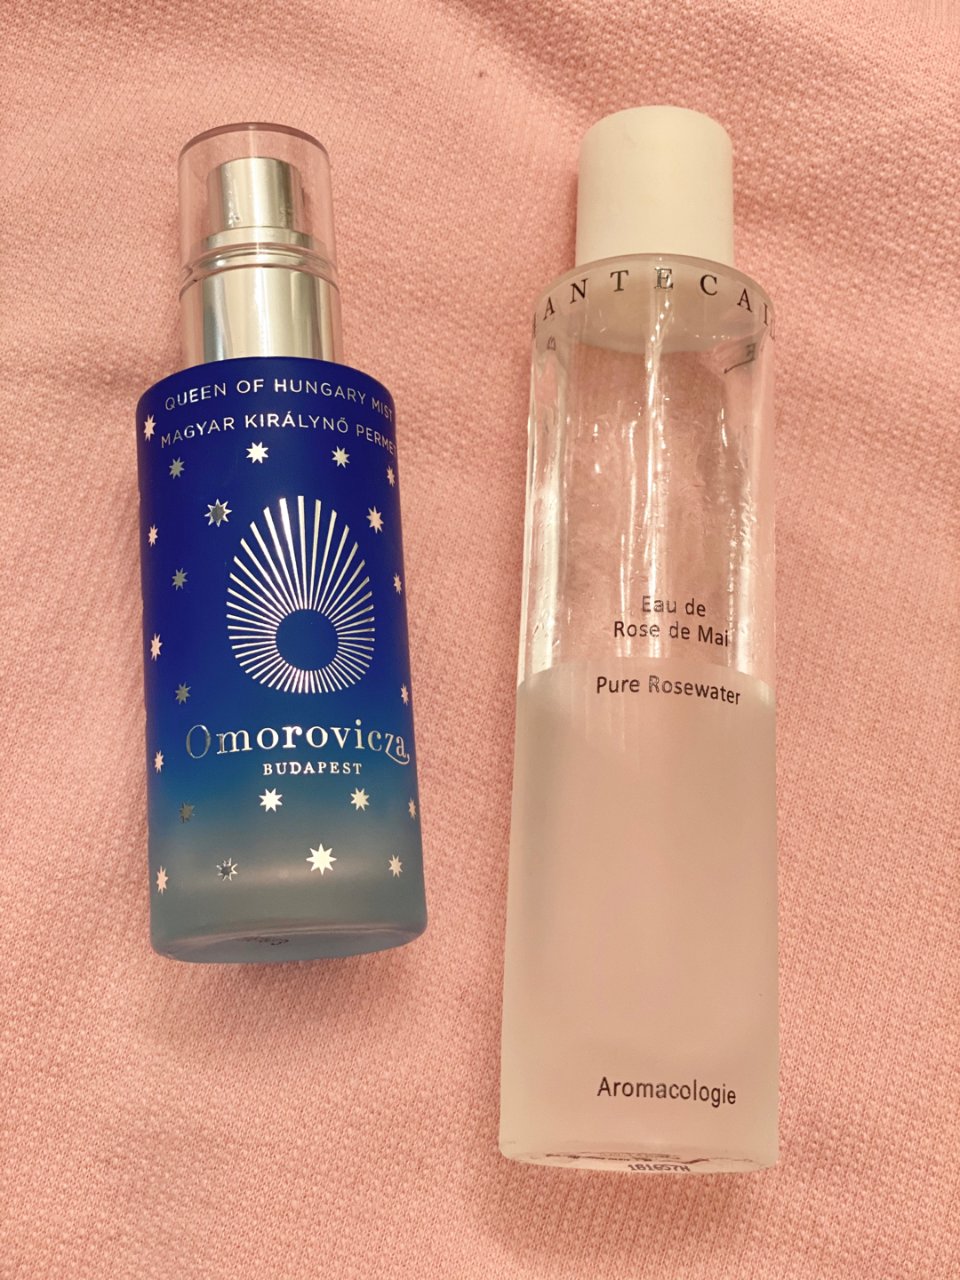 Chantecaille 香缇卡,Omorovicza